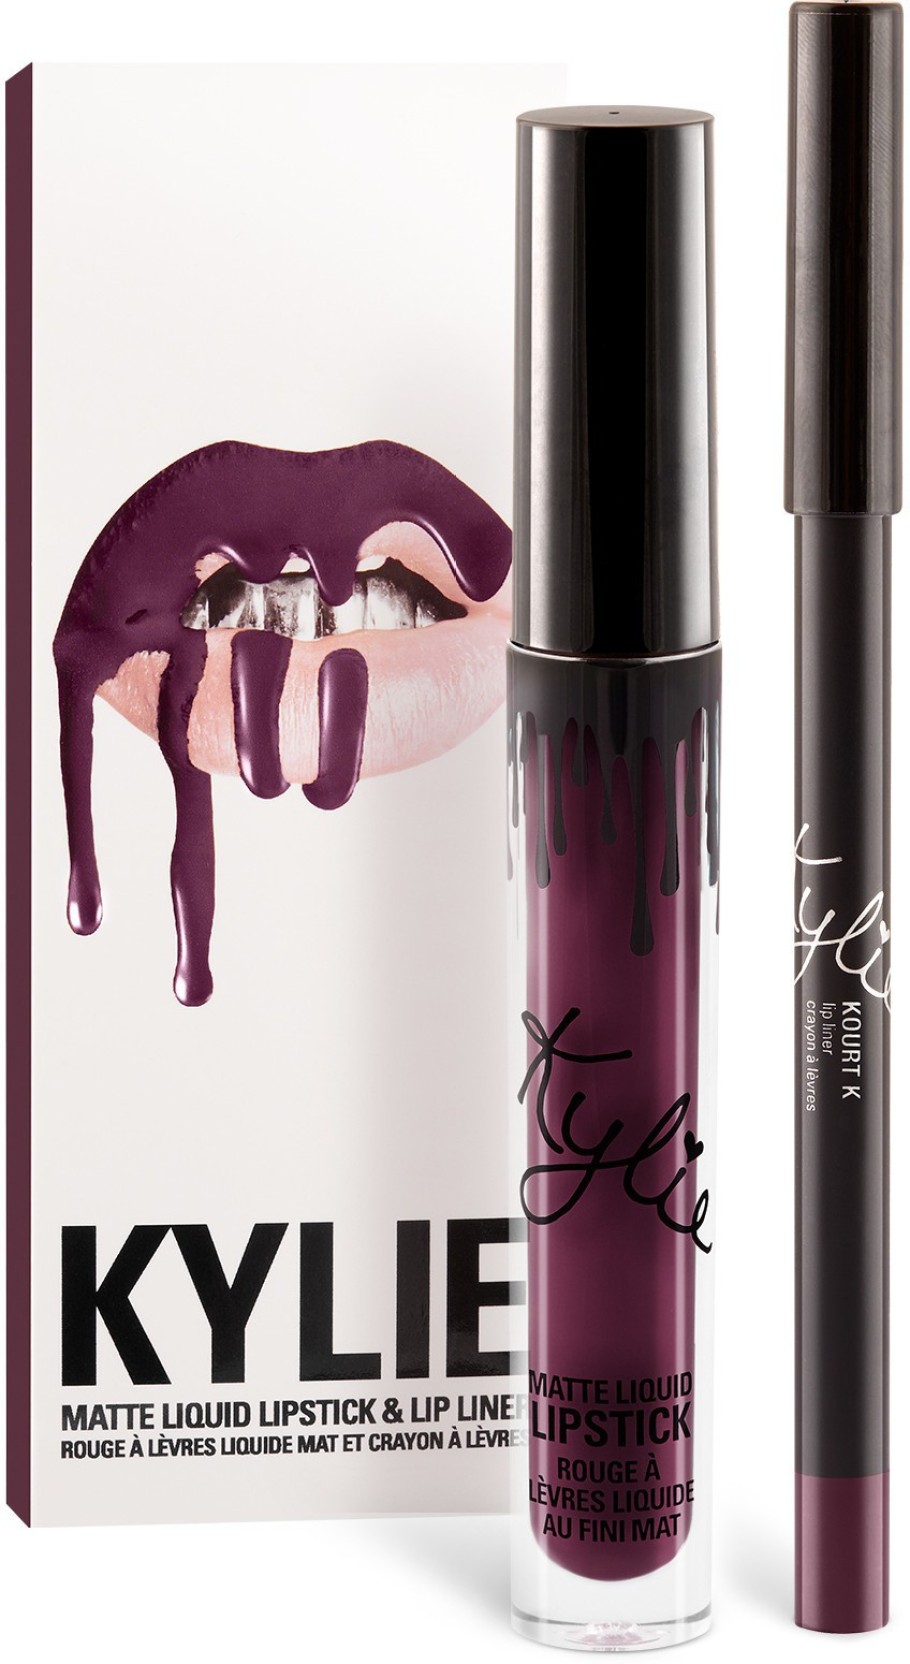 The yard jenner india price in kylie lipstick box